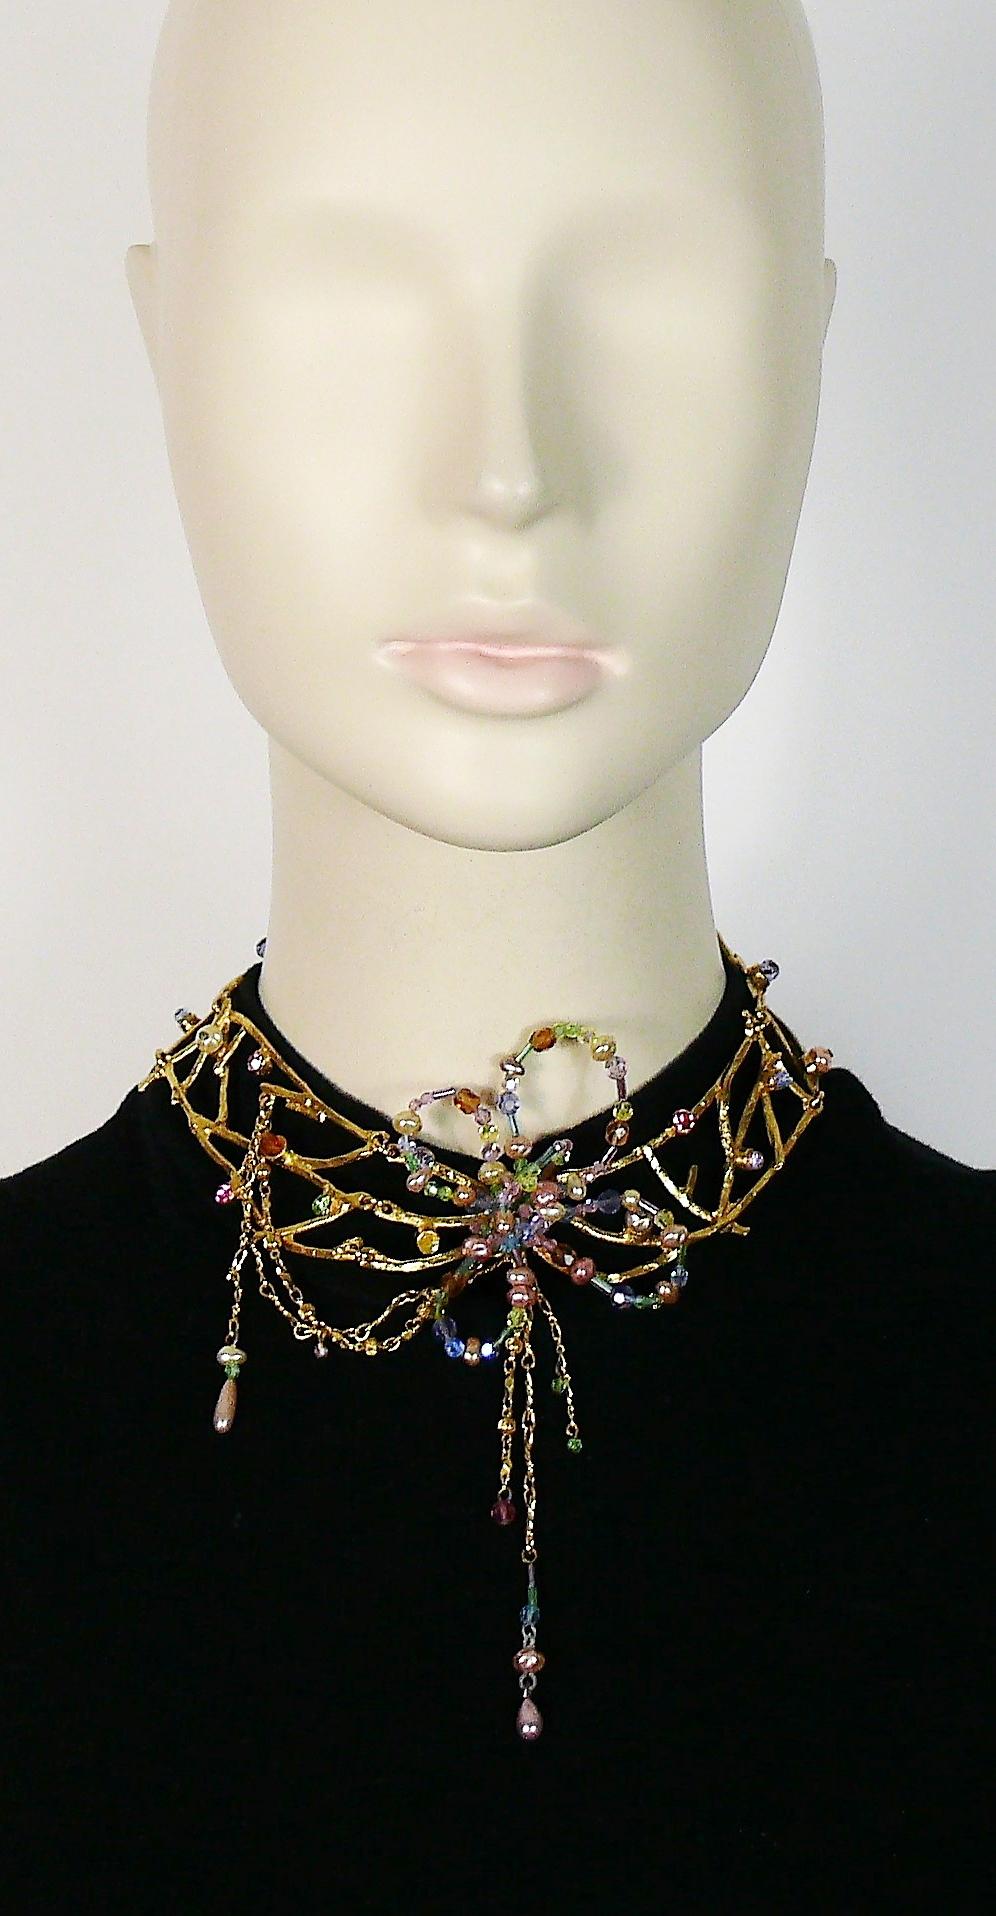 CHRISTIAN LACROIX delicate vintage gold toned choker necklace featuring intertwined jewelled branches and a stylized flower at the center with multicolor beads and faux pearls.

T-bar toggle closure.
Adjustable length.

Marked CHRISTIAN LACROIX CL